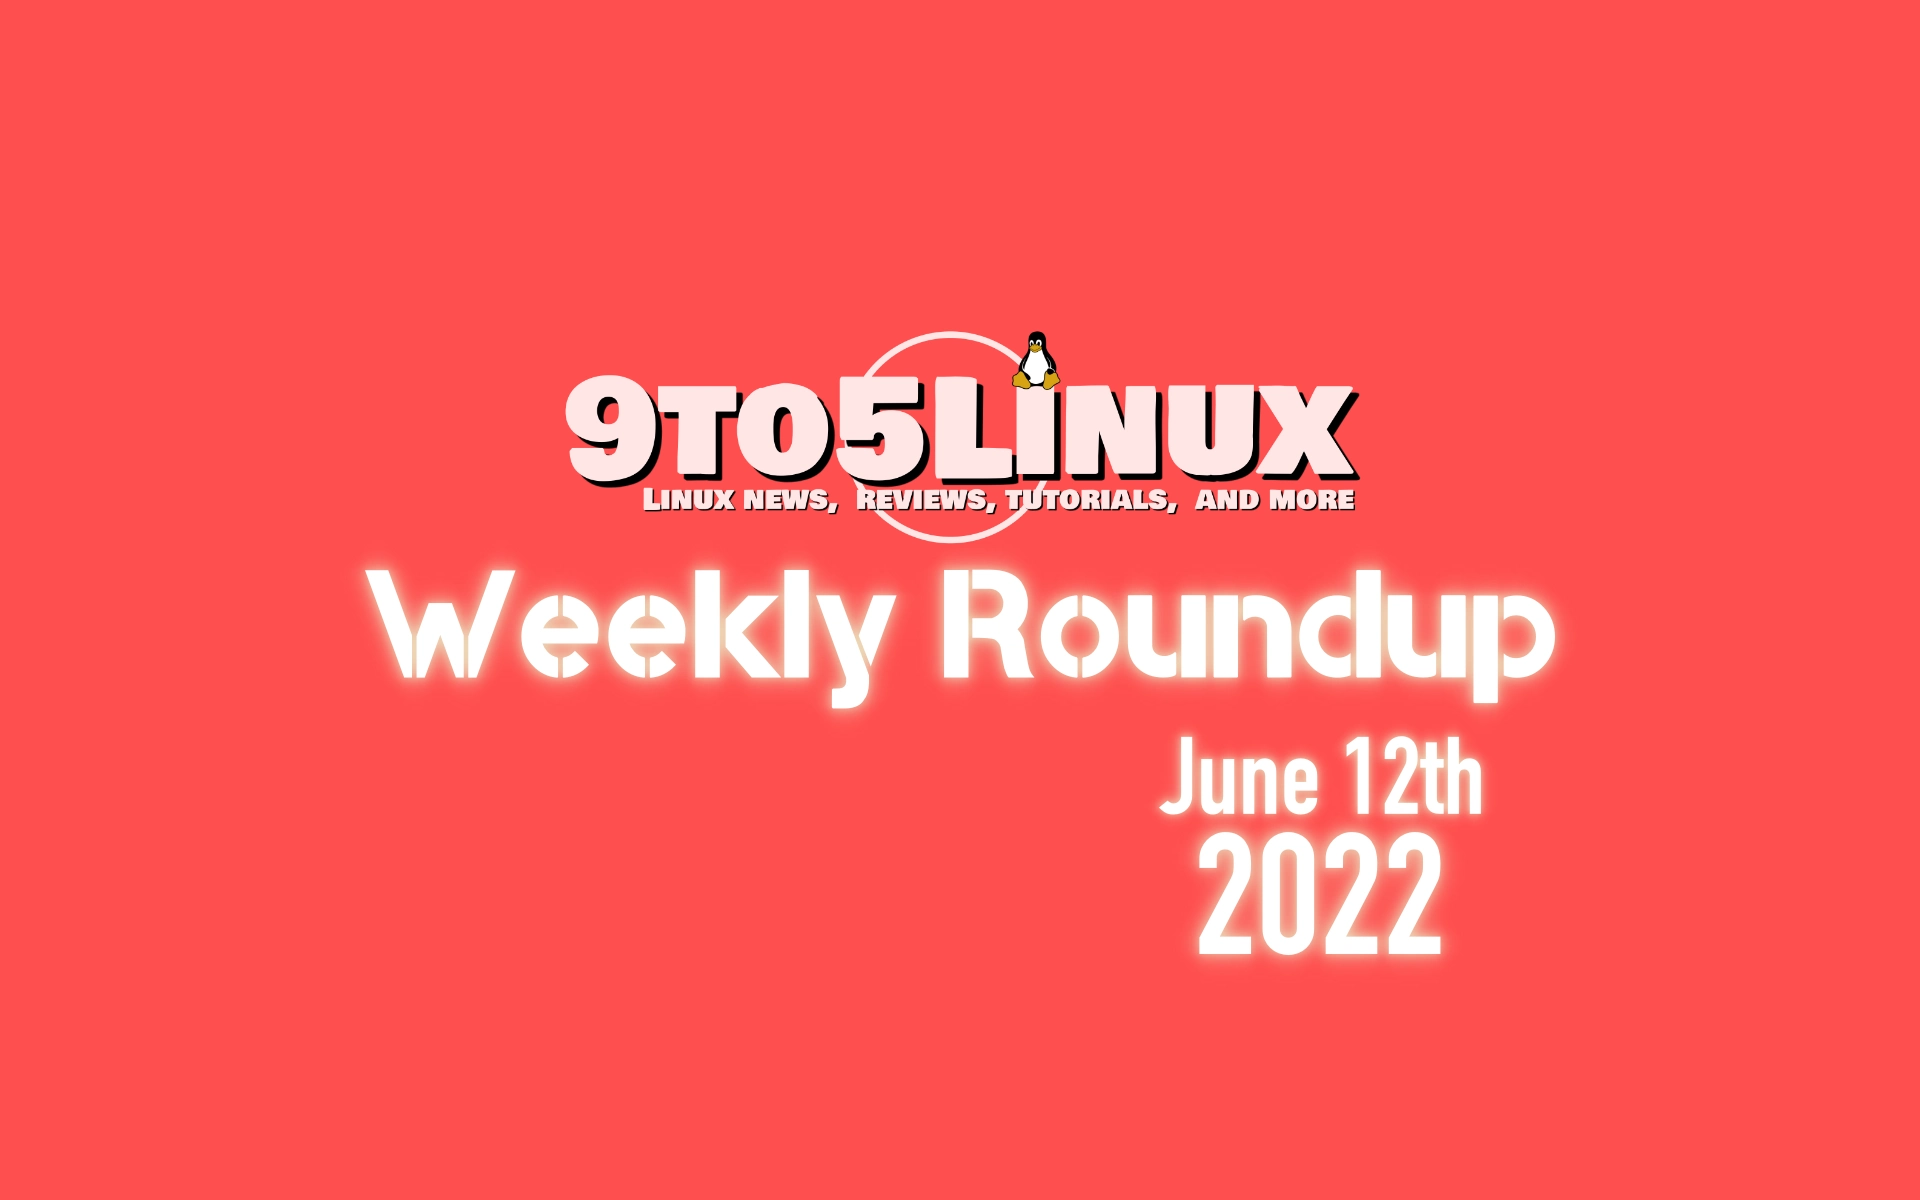 9to5Linux Weekly Roundup: June 12th, 2022